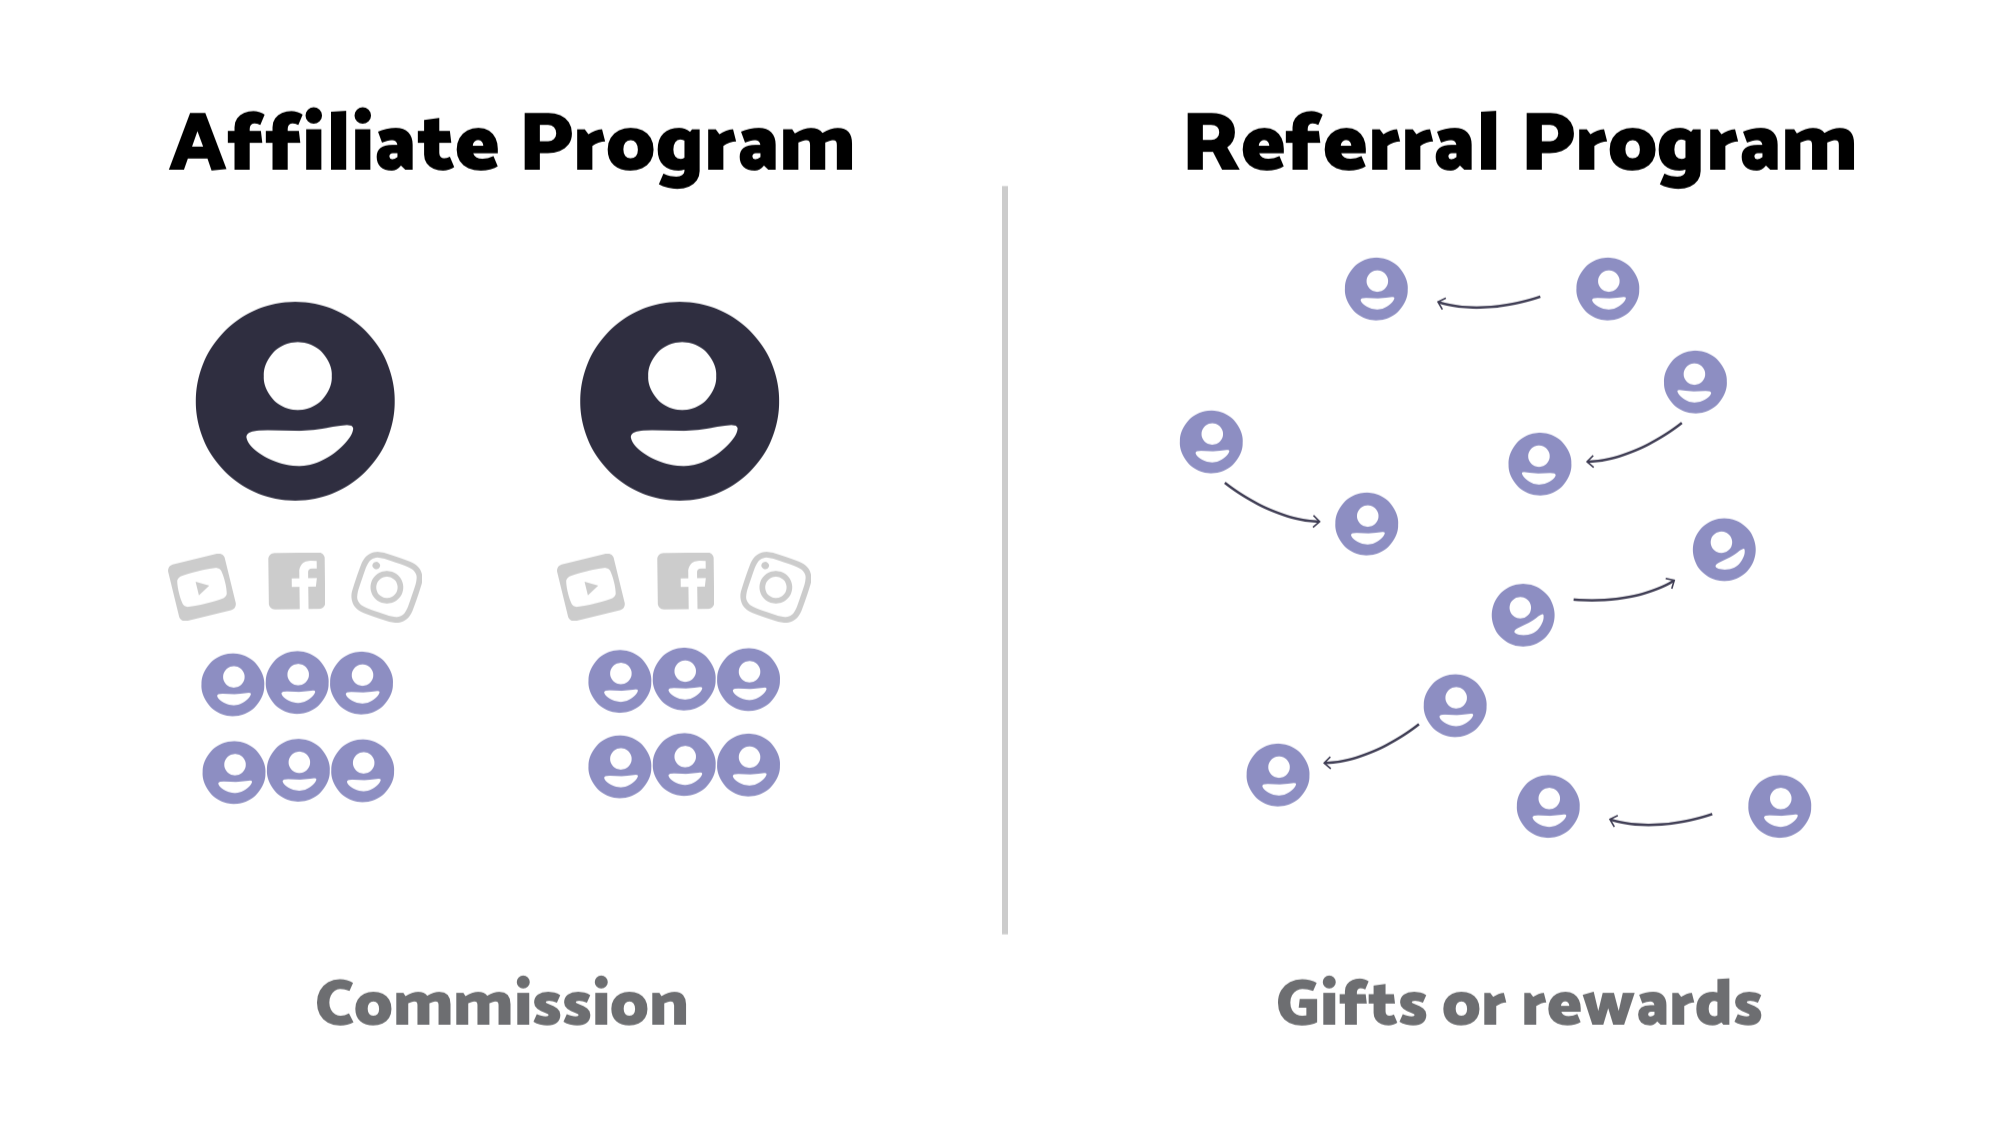 What is the difference between affiliate and referral program